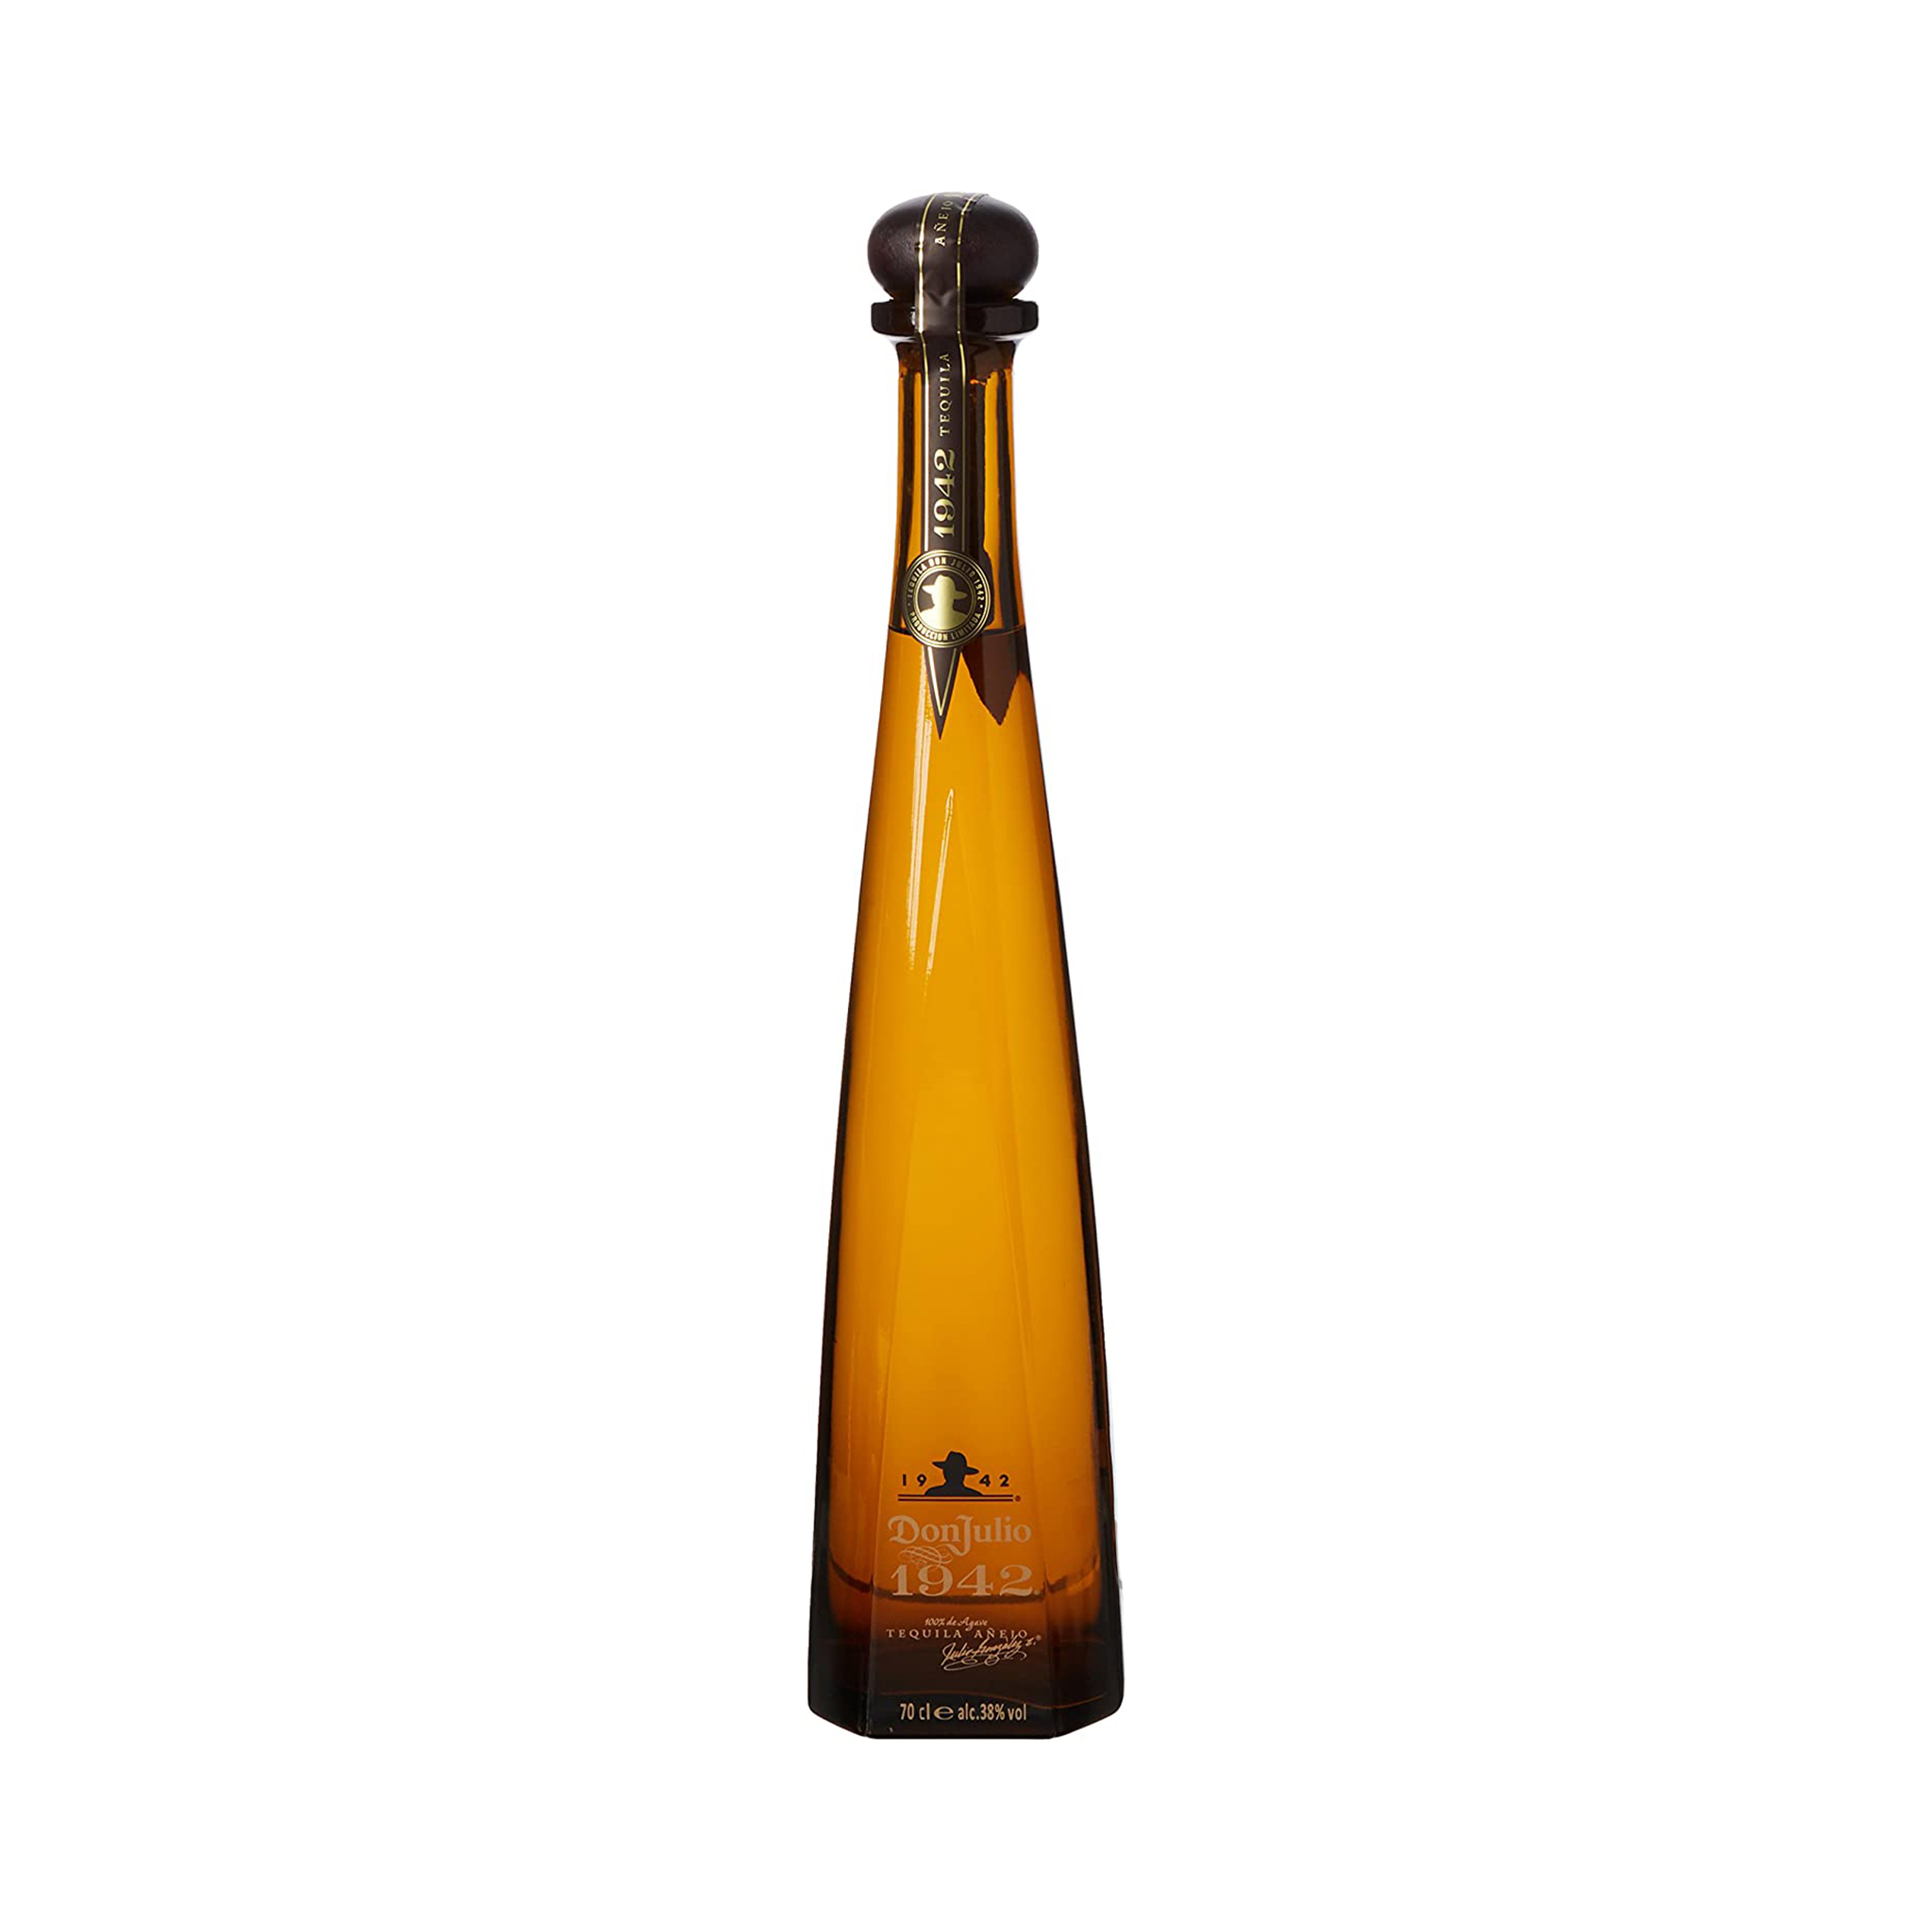 Don Julio 1942 Anejotequila, 70cl